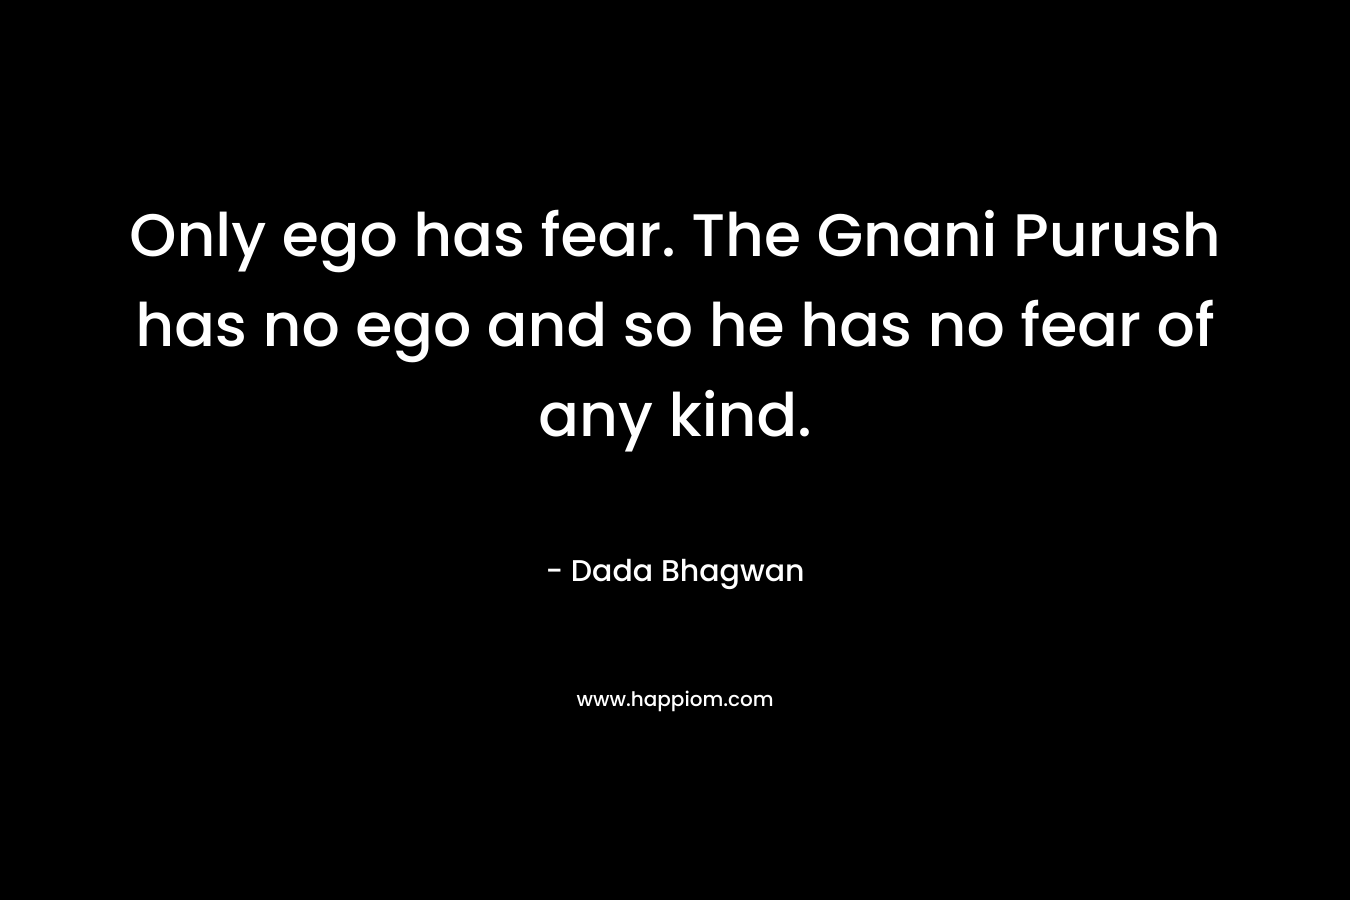 Only ego has fear. The Gnani Purush has no ego and so he has no fear of any kind.